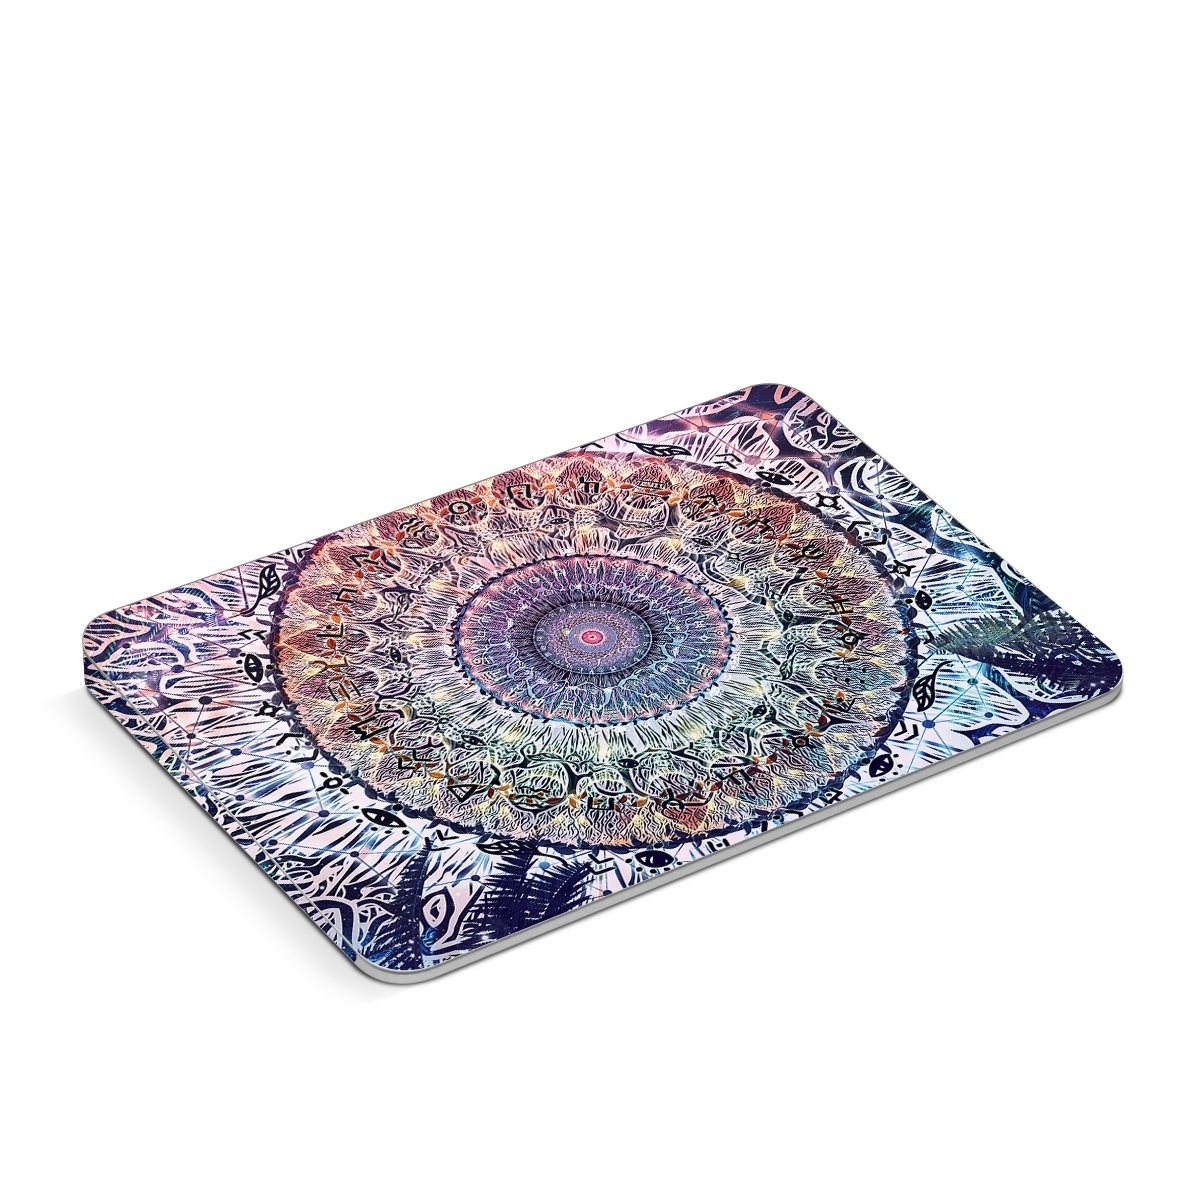 Apple Magic Trackpad Skin design of Tapestry, Pattern, Art, Close-up, Circle, Fractal art, Textile, Eye, Design, Kaleidoscope, with blue, red, yellow, purple, green colors